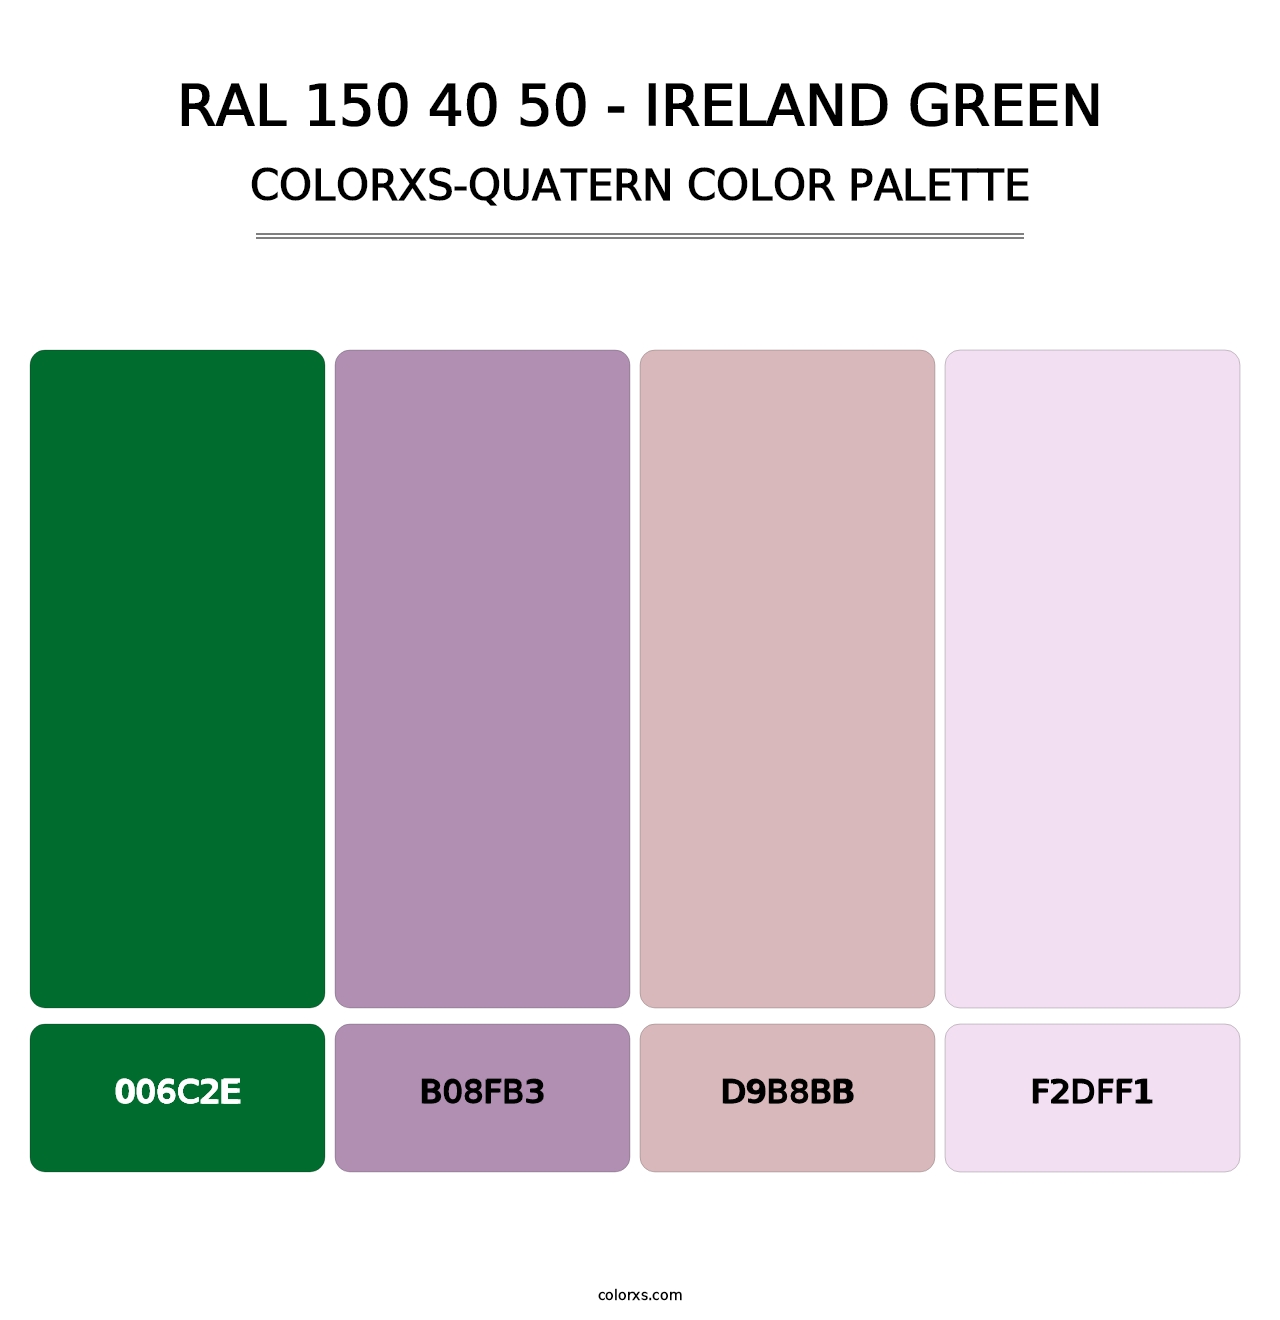 RAL 150 40 50 - Ireland Green - Colorxs Quatern Palette